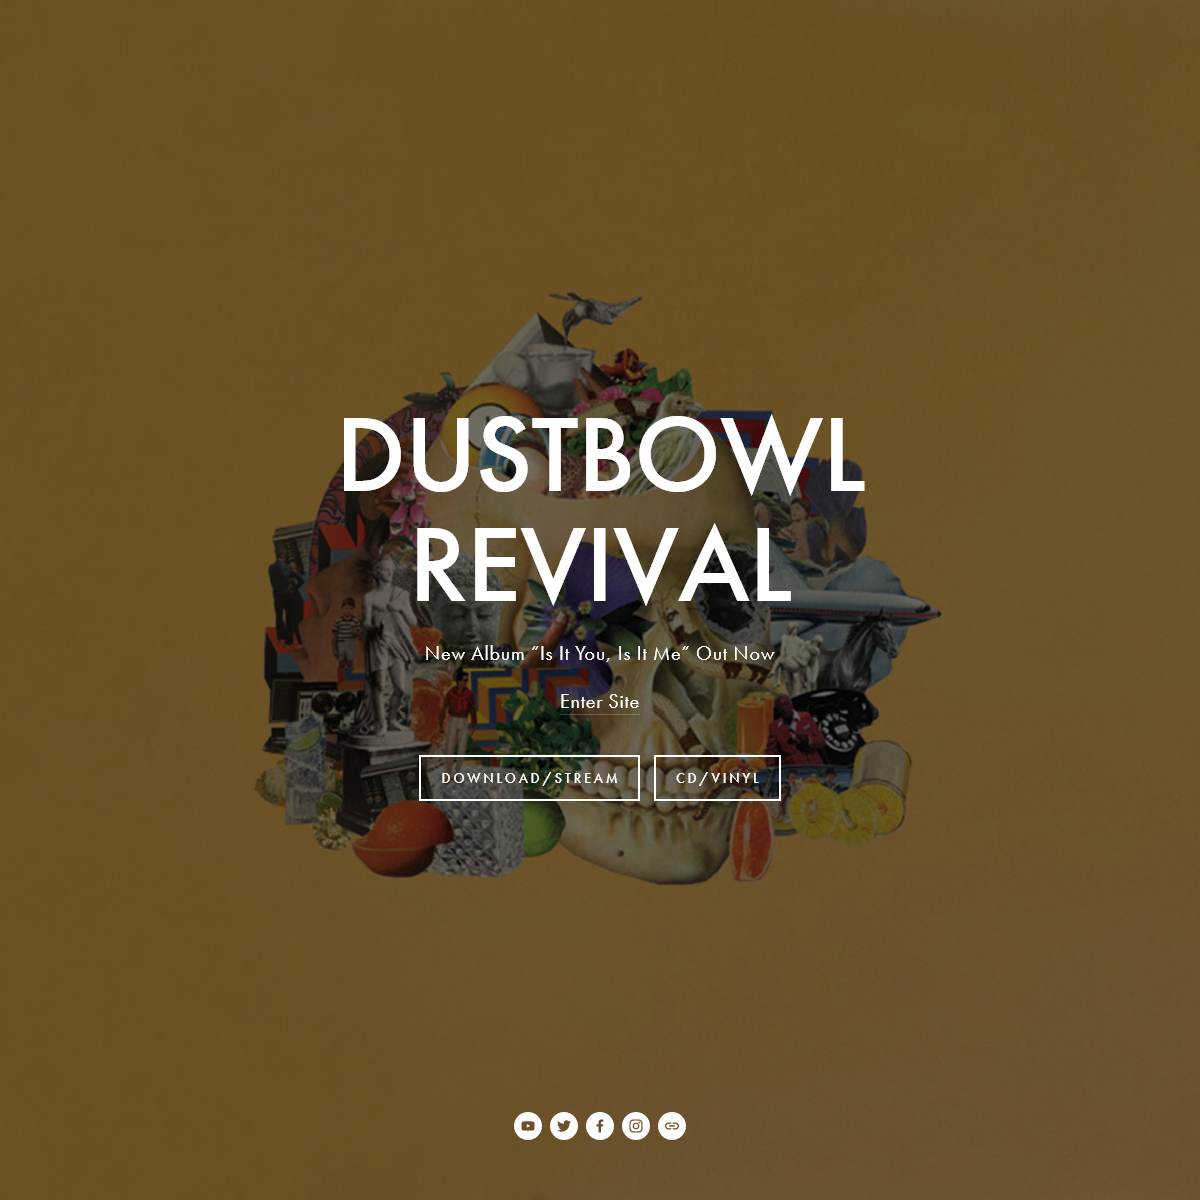 A complete backup of dustbowlrevival.com